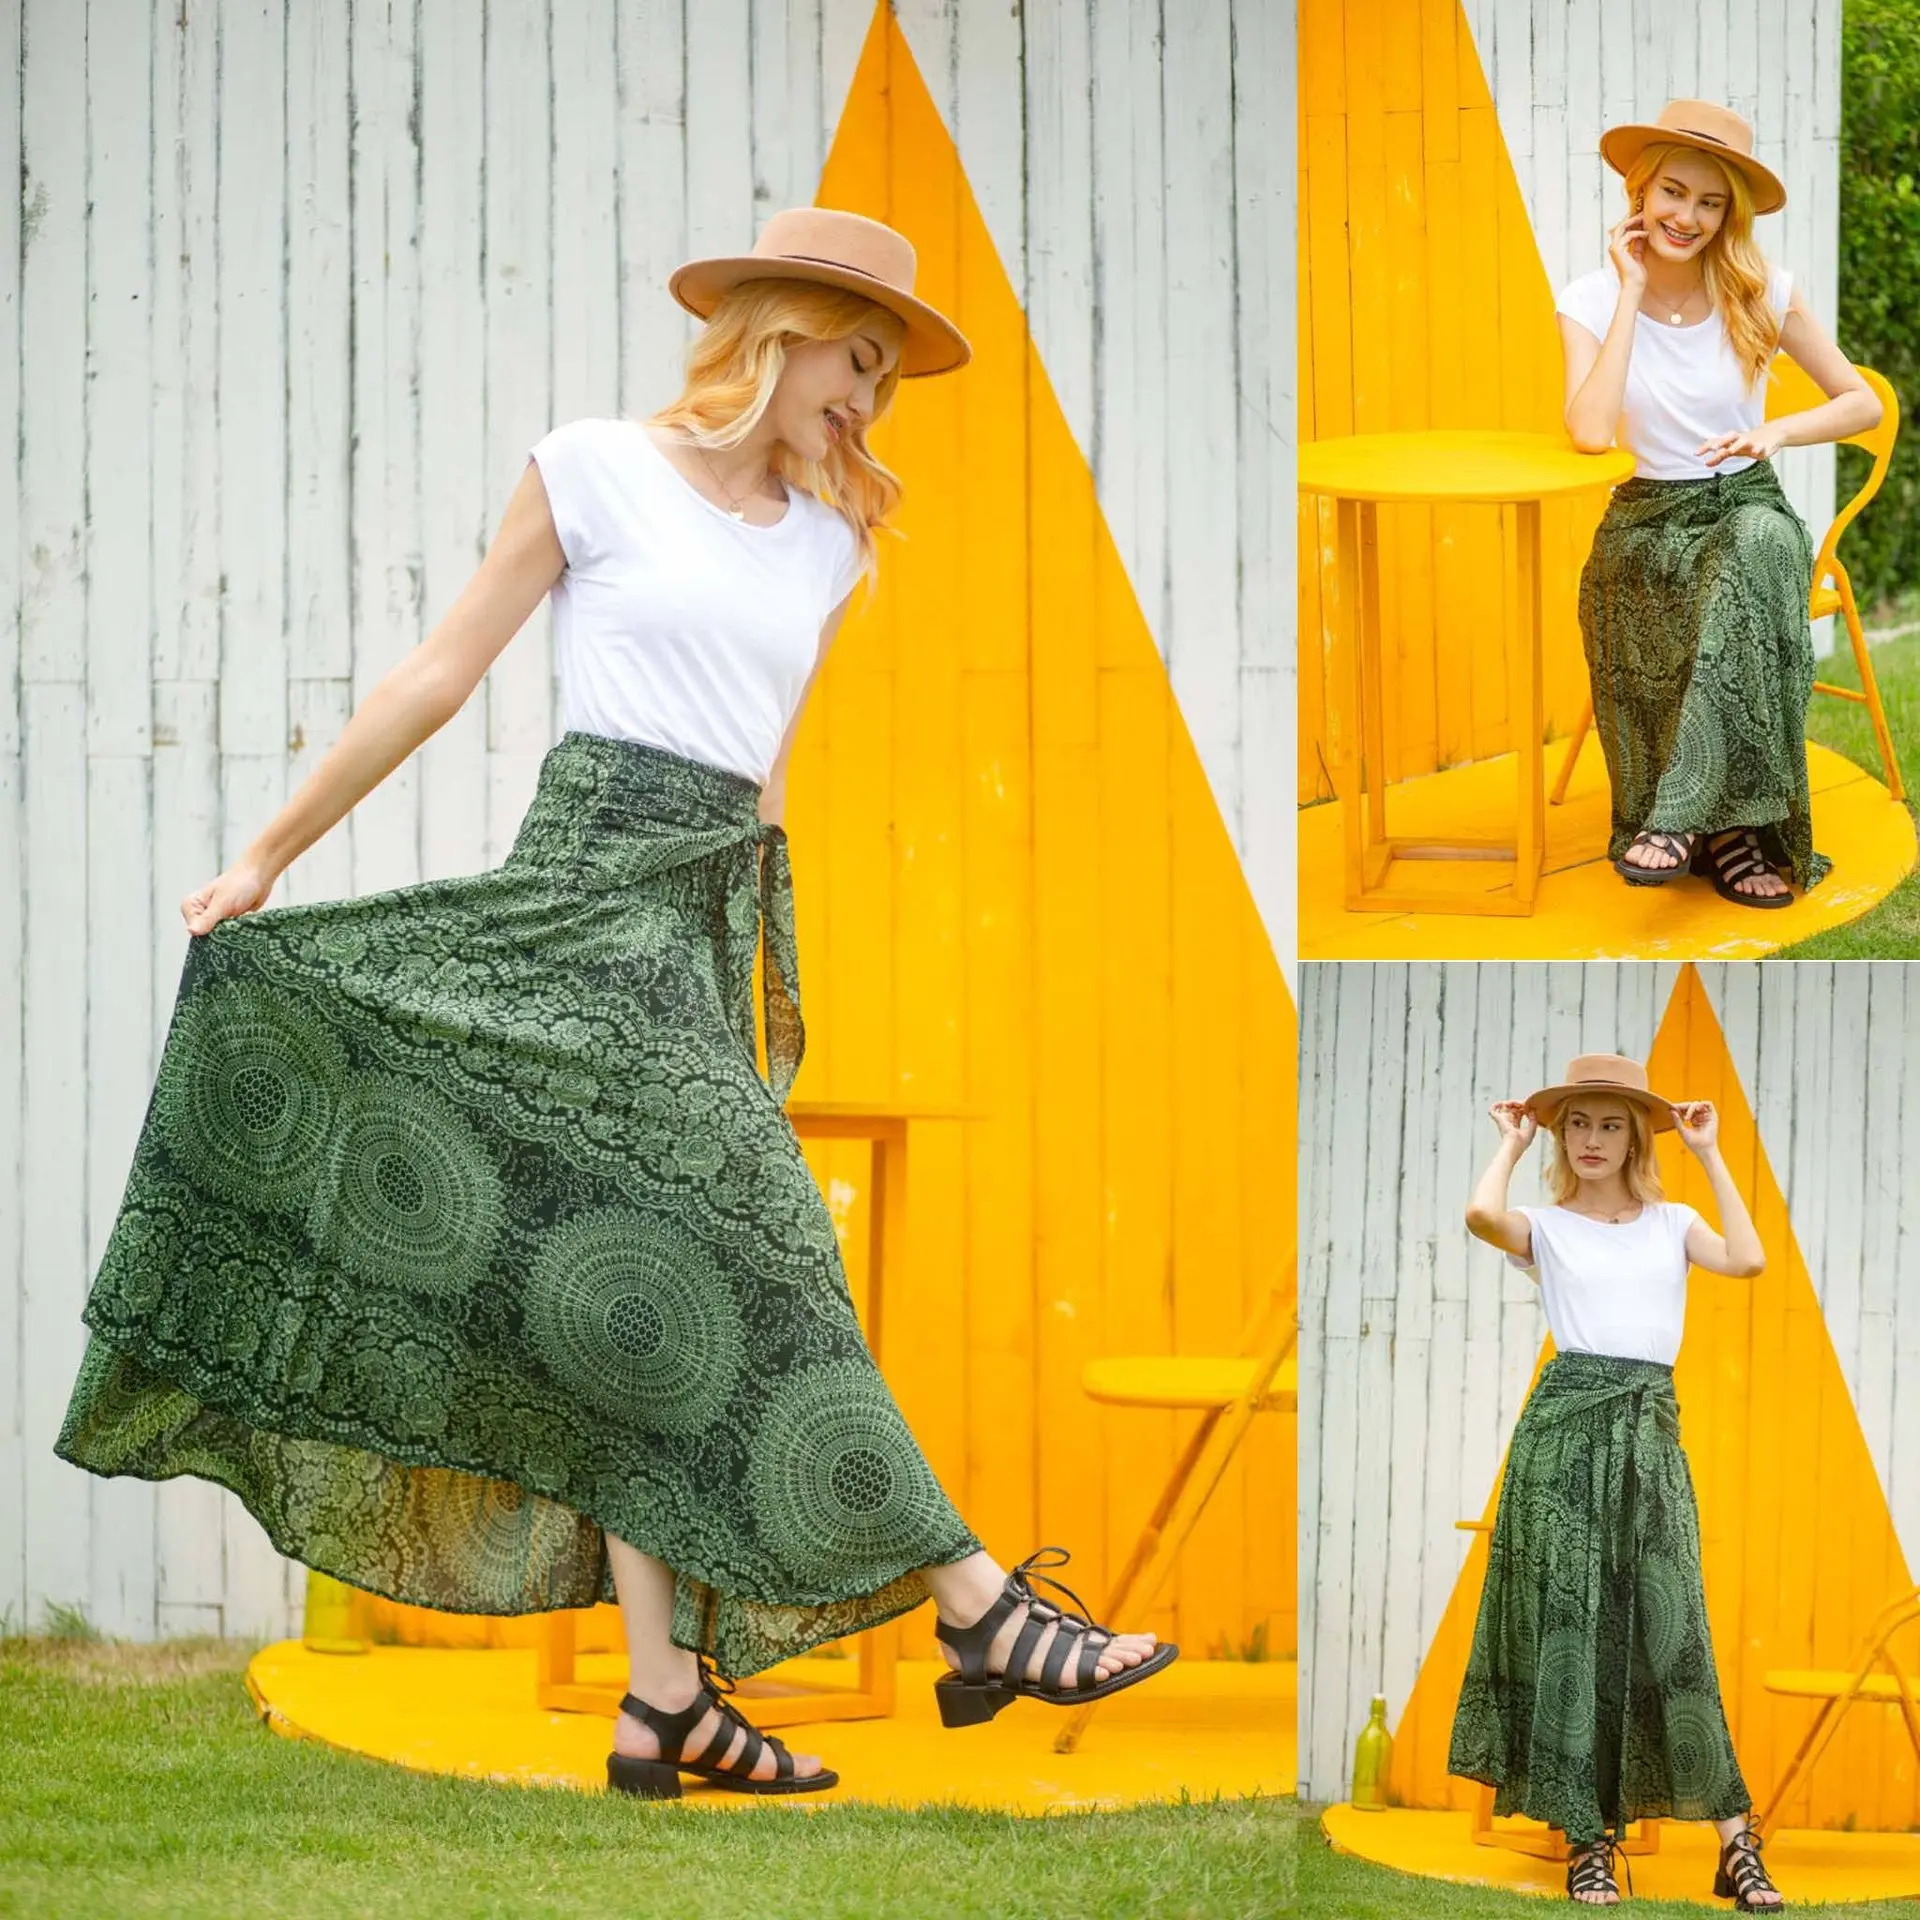 Women Unique Style Bohemian Long Skirt Elastic High Waist Big Hem Tie-Up Skirt For Beach Seaside Vacation Fashionable Charming sheer bathing suit cover up